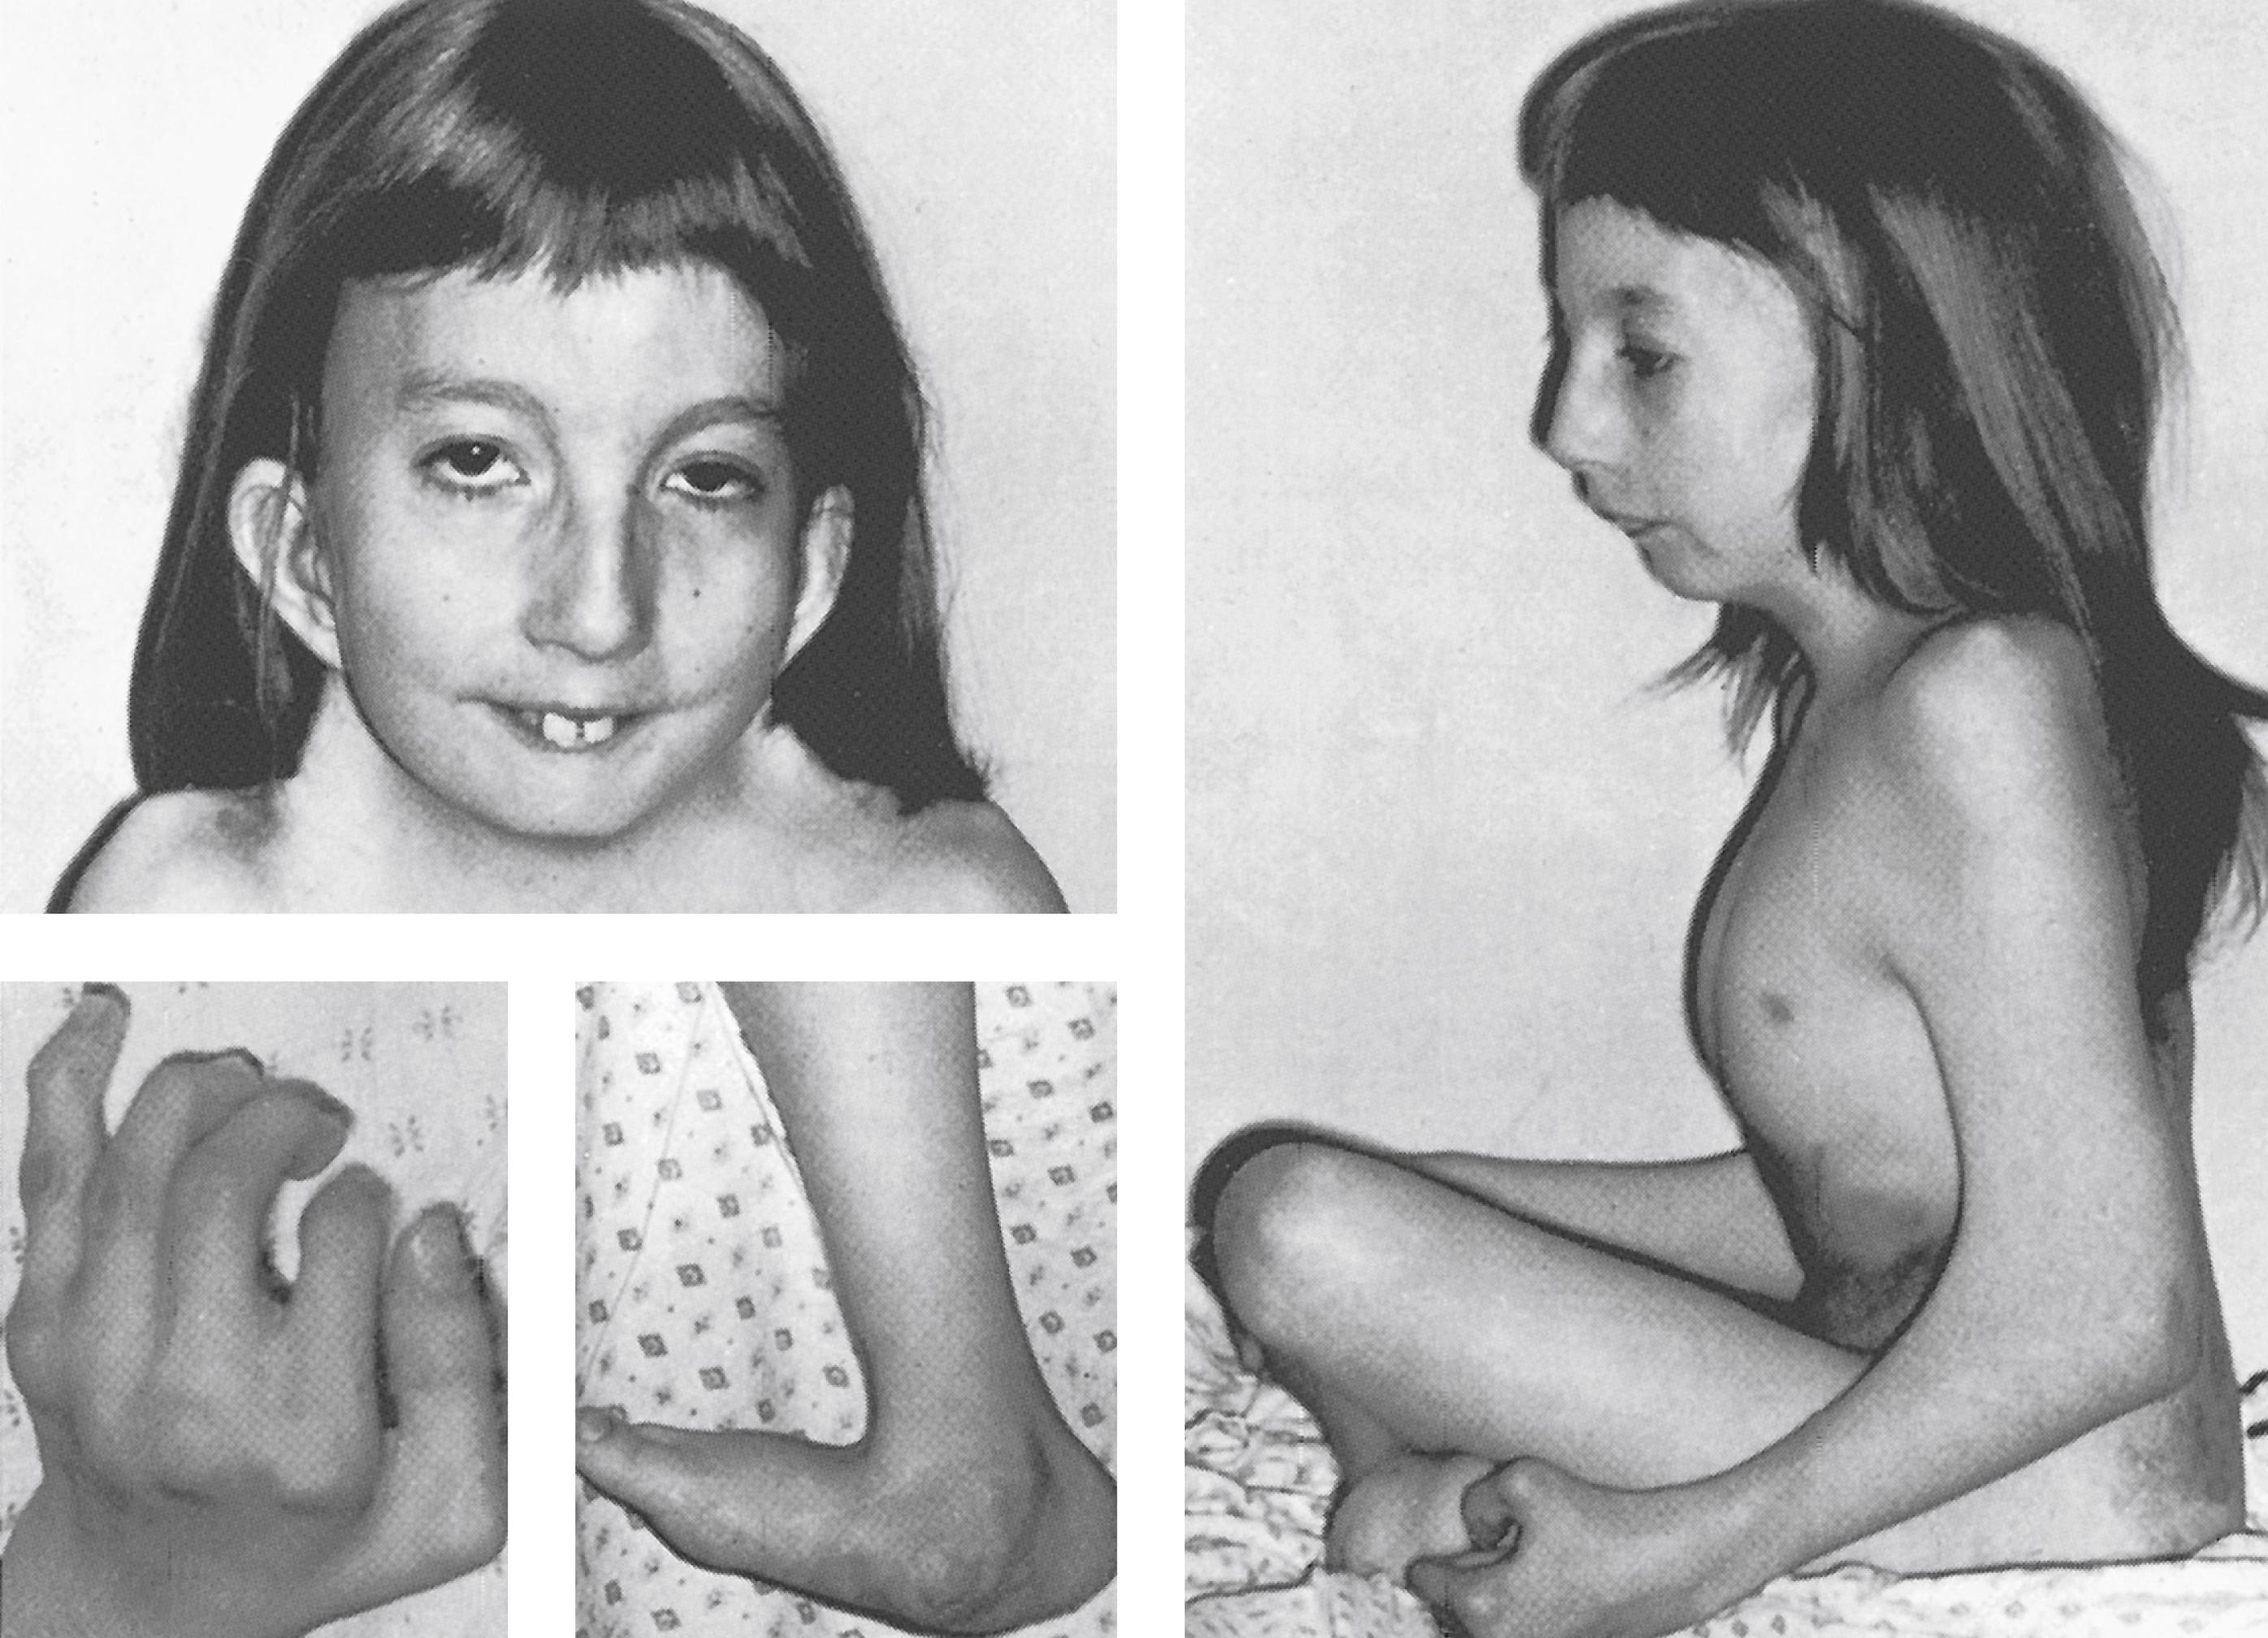 FIGURE 1, A 12-year-old girl showing features of Escobar syndrome.